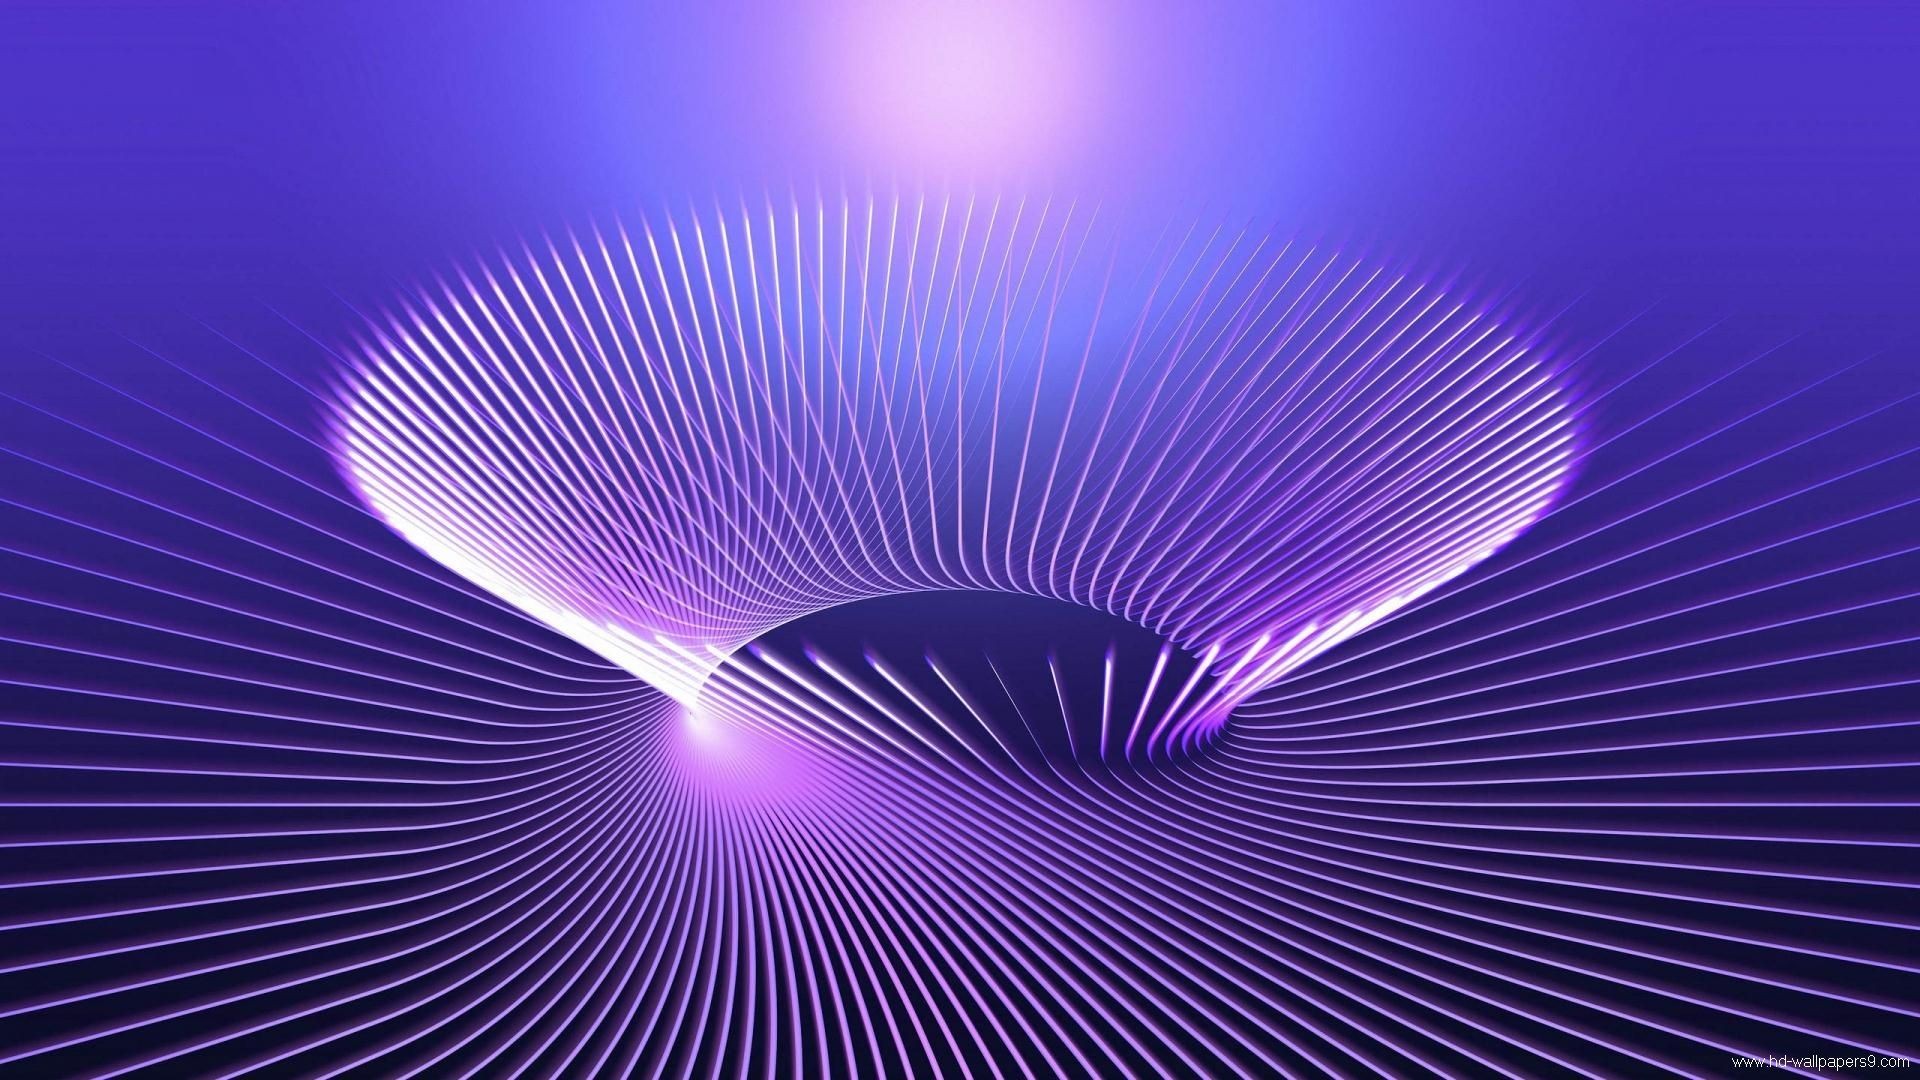 Holographic Wallpaper Download Free Awesome Full HD Backgrounds